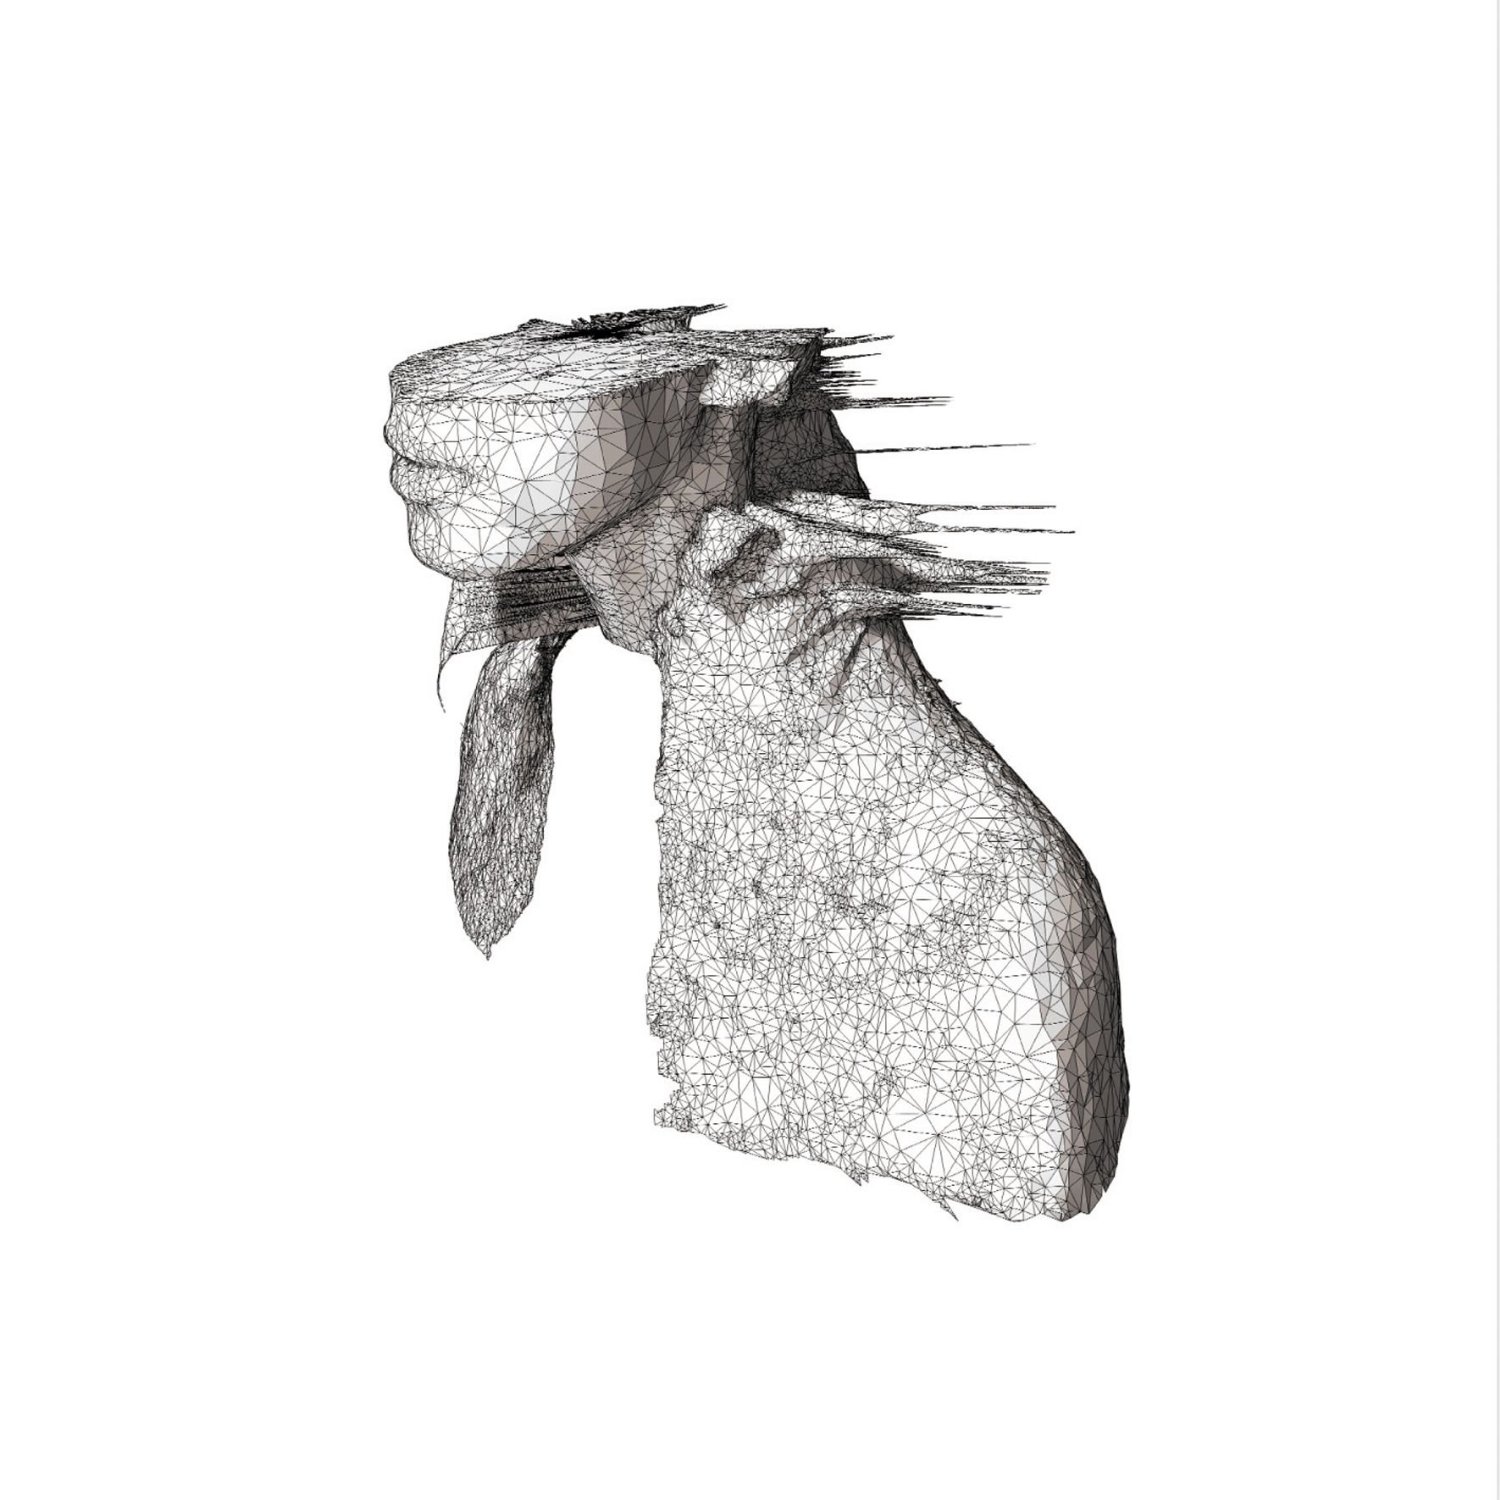 Coldplay : A Rush of blood to the head, CD, Europe, 2002 - 12 €